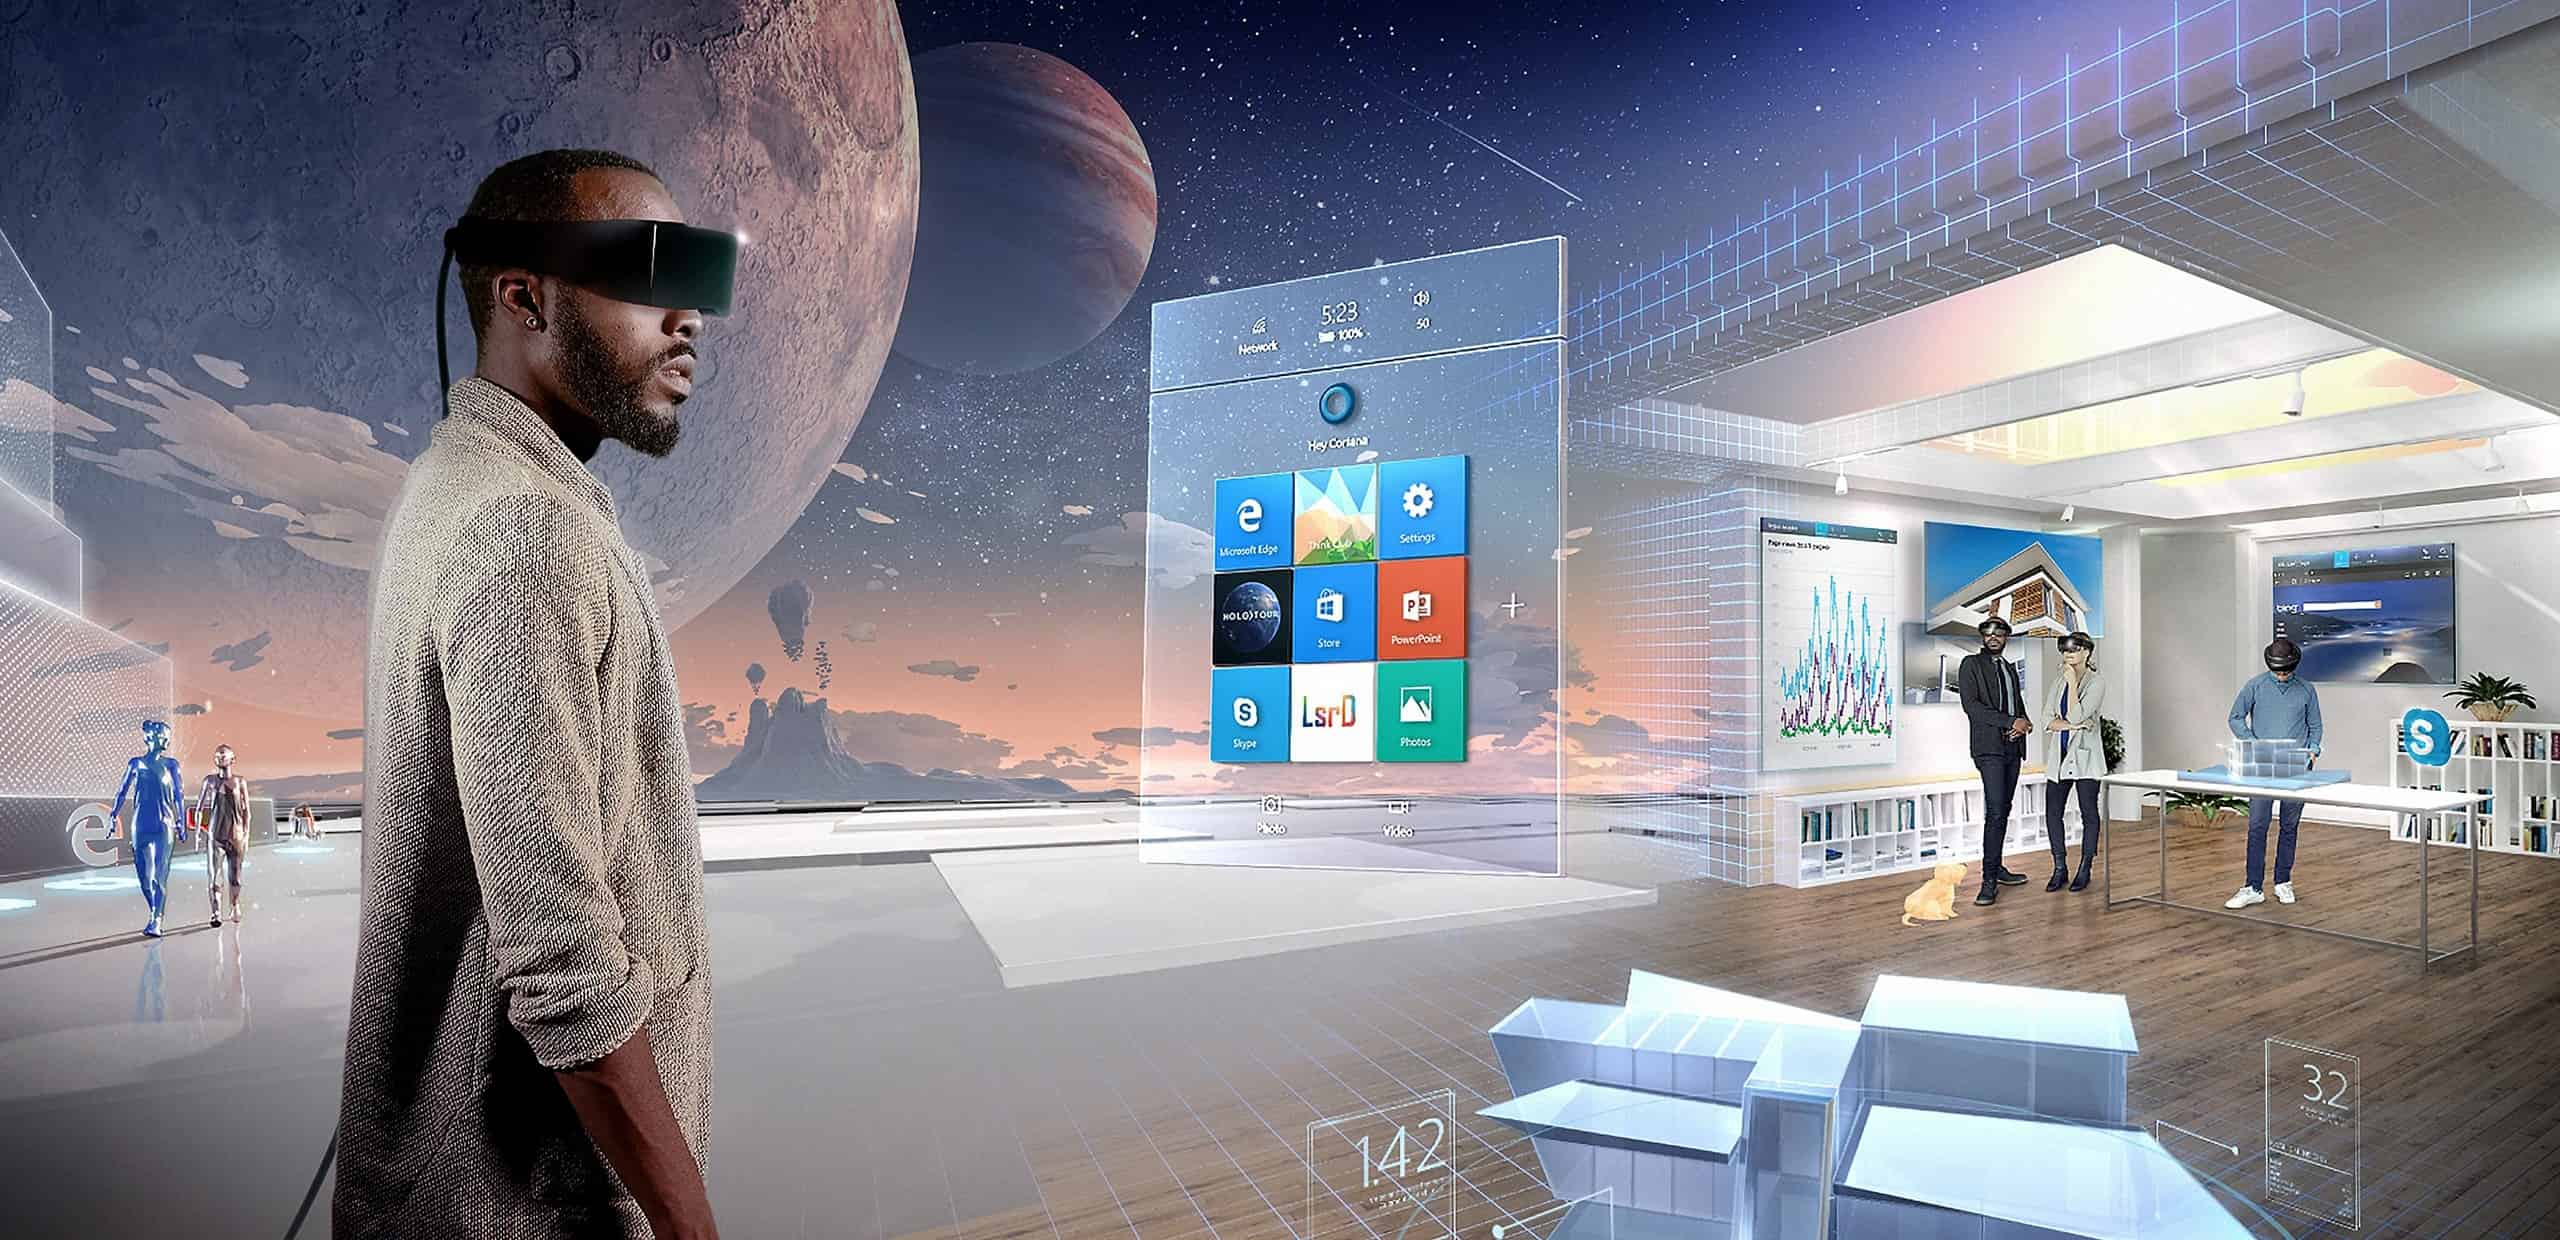 AltSpaceVR shutdown, MRTK and HoloLens layoffs reflect Microsoft’s significant MR/VR business changes